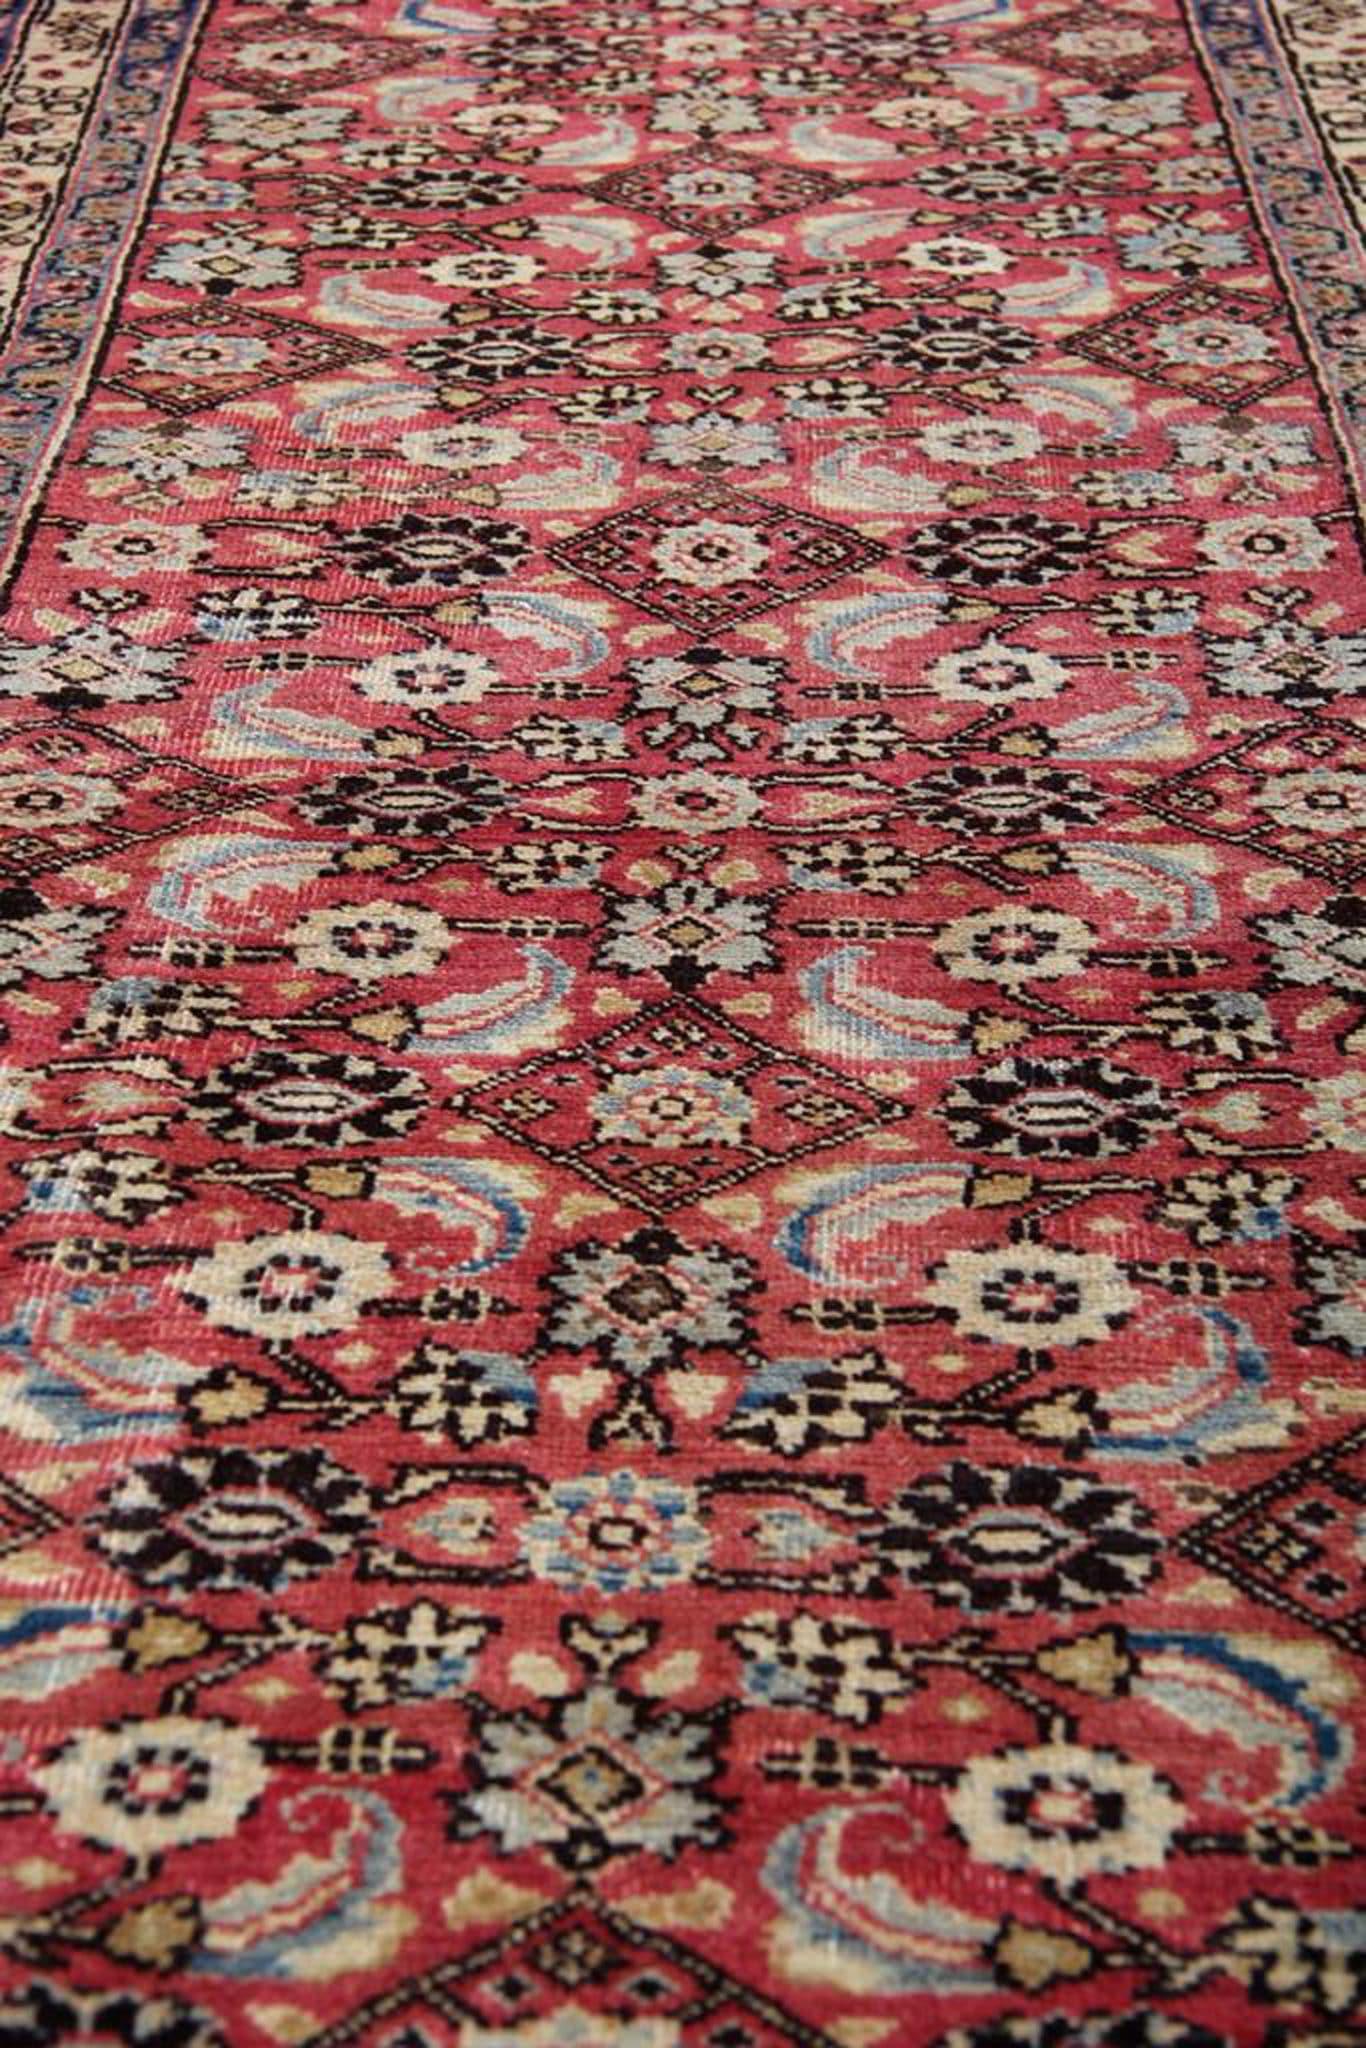 This rug boasts a hand-knotted weave, a testament to the meticulous attention to detail and craftsmanship invested in its creation. Despite its vintage status, this rug remains in excellent condition, a testament to its durability and the quality of